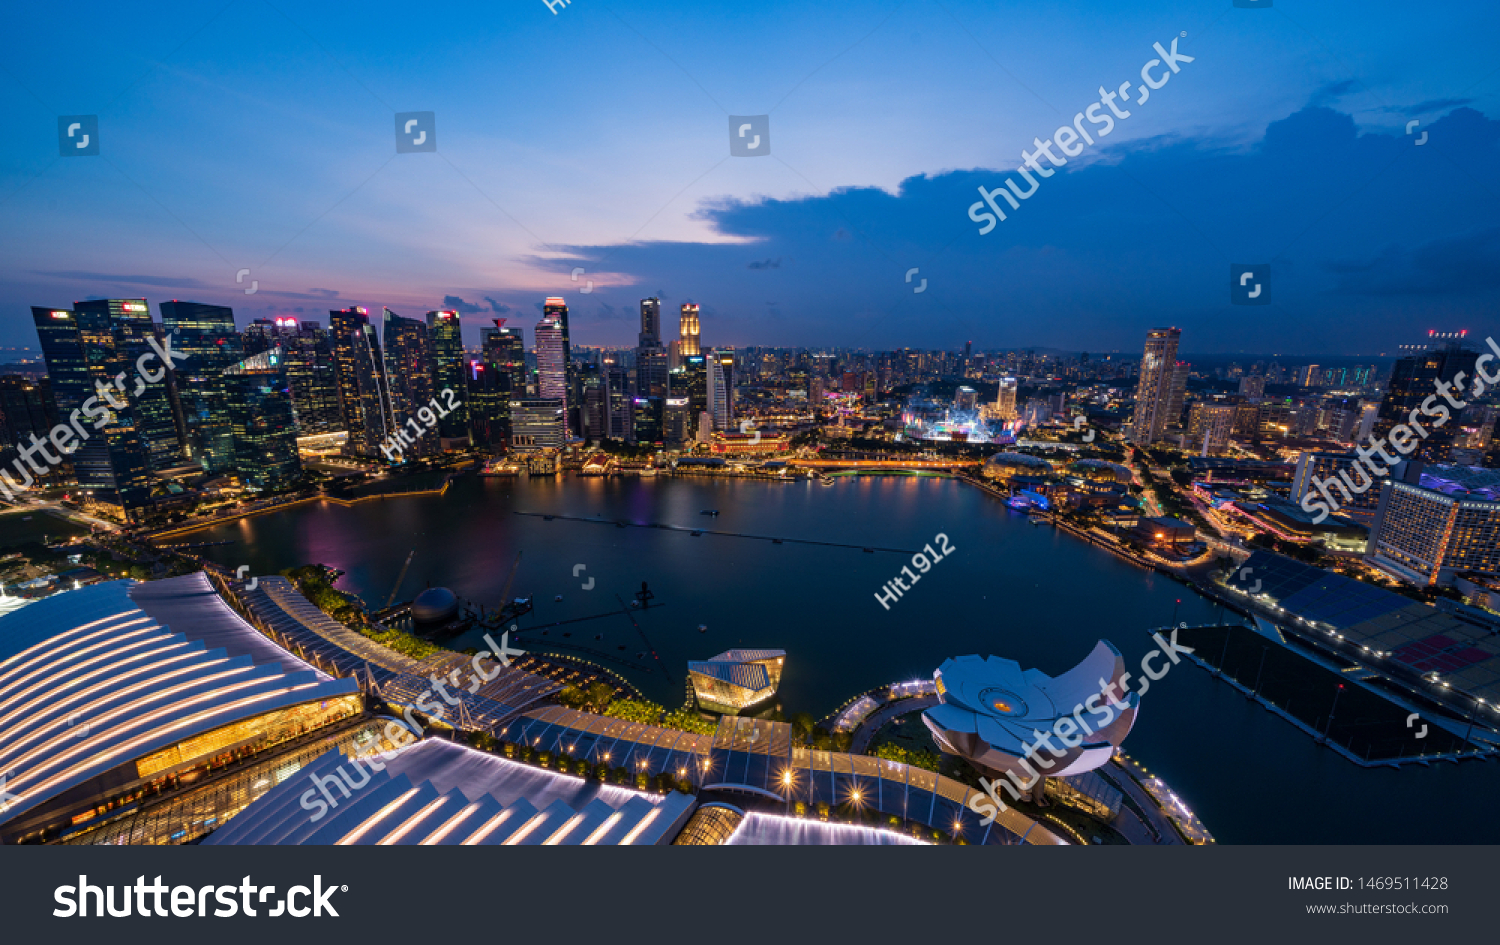 Singapore - July 2019:Singapore skyscrapers at night. Singapore is an island city-state in Southeast Asia. #1469511428